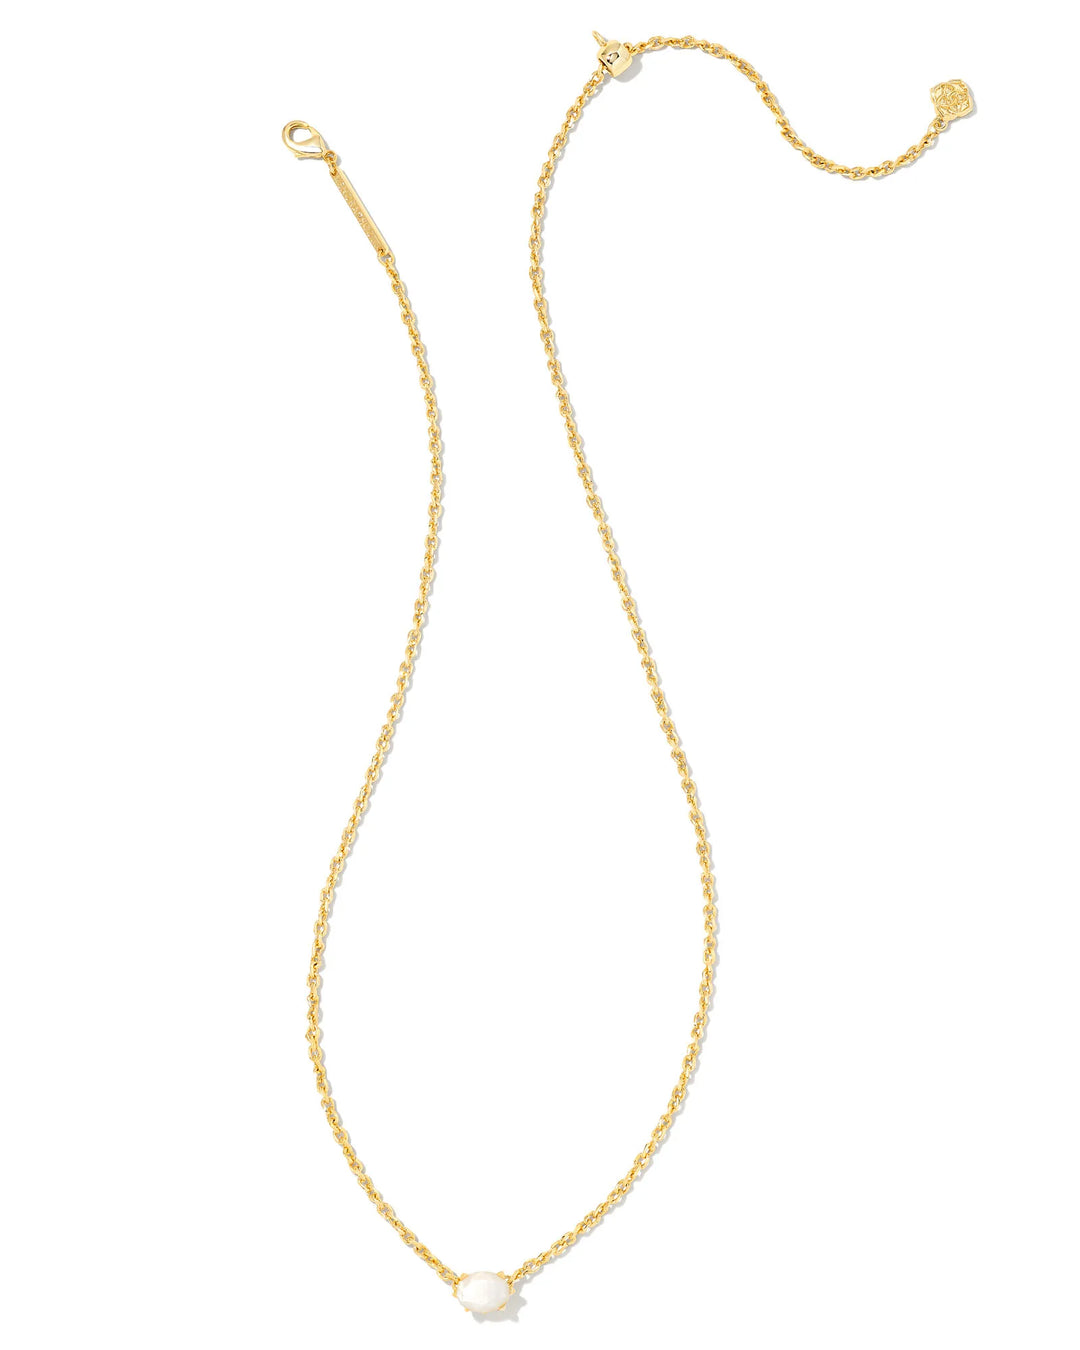 CAILIN CRYSTAL PENDANT NECKLACE - GOLD IVORY MOP